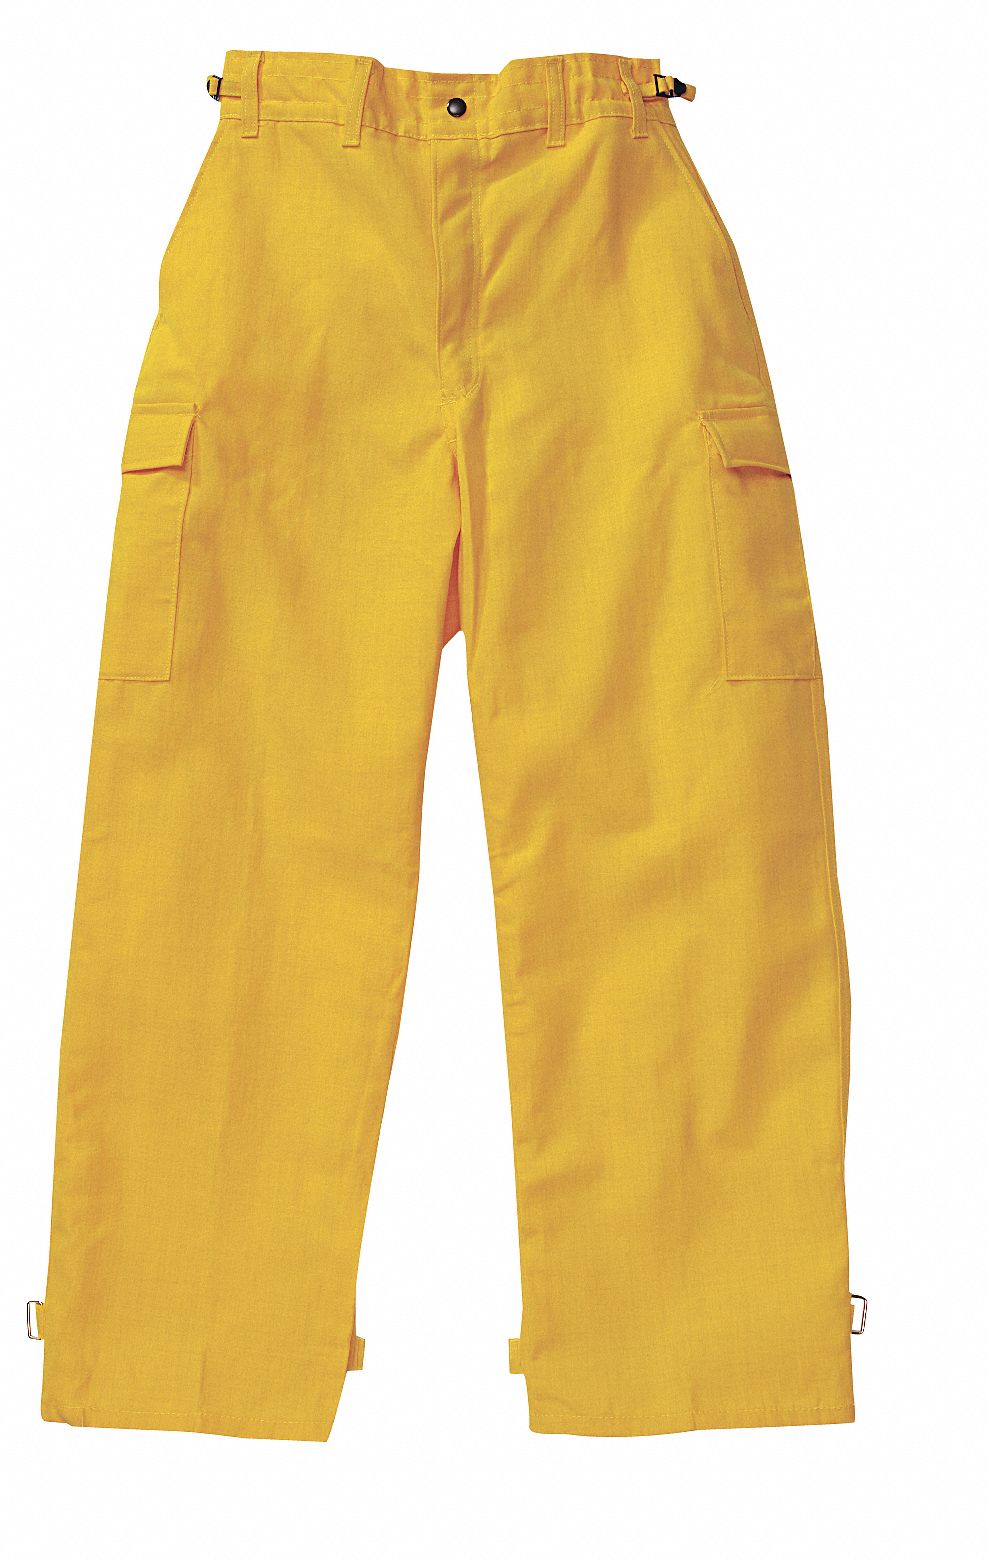 Wildland Fire Over Pants: XL, 39 to 43 in Fits Waist Size, 32 in Inseam, Yellow